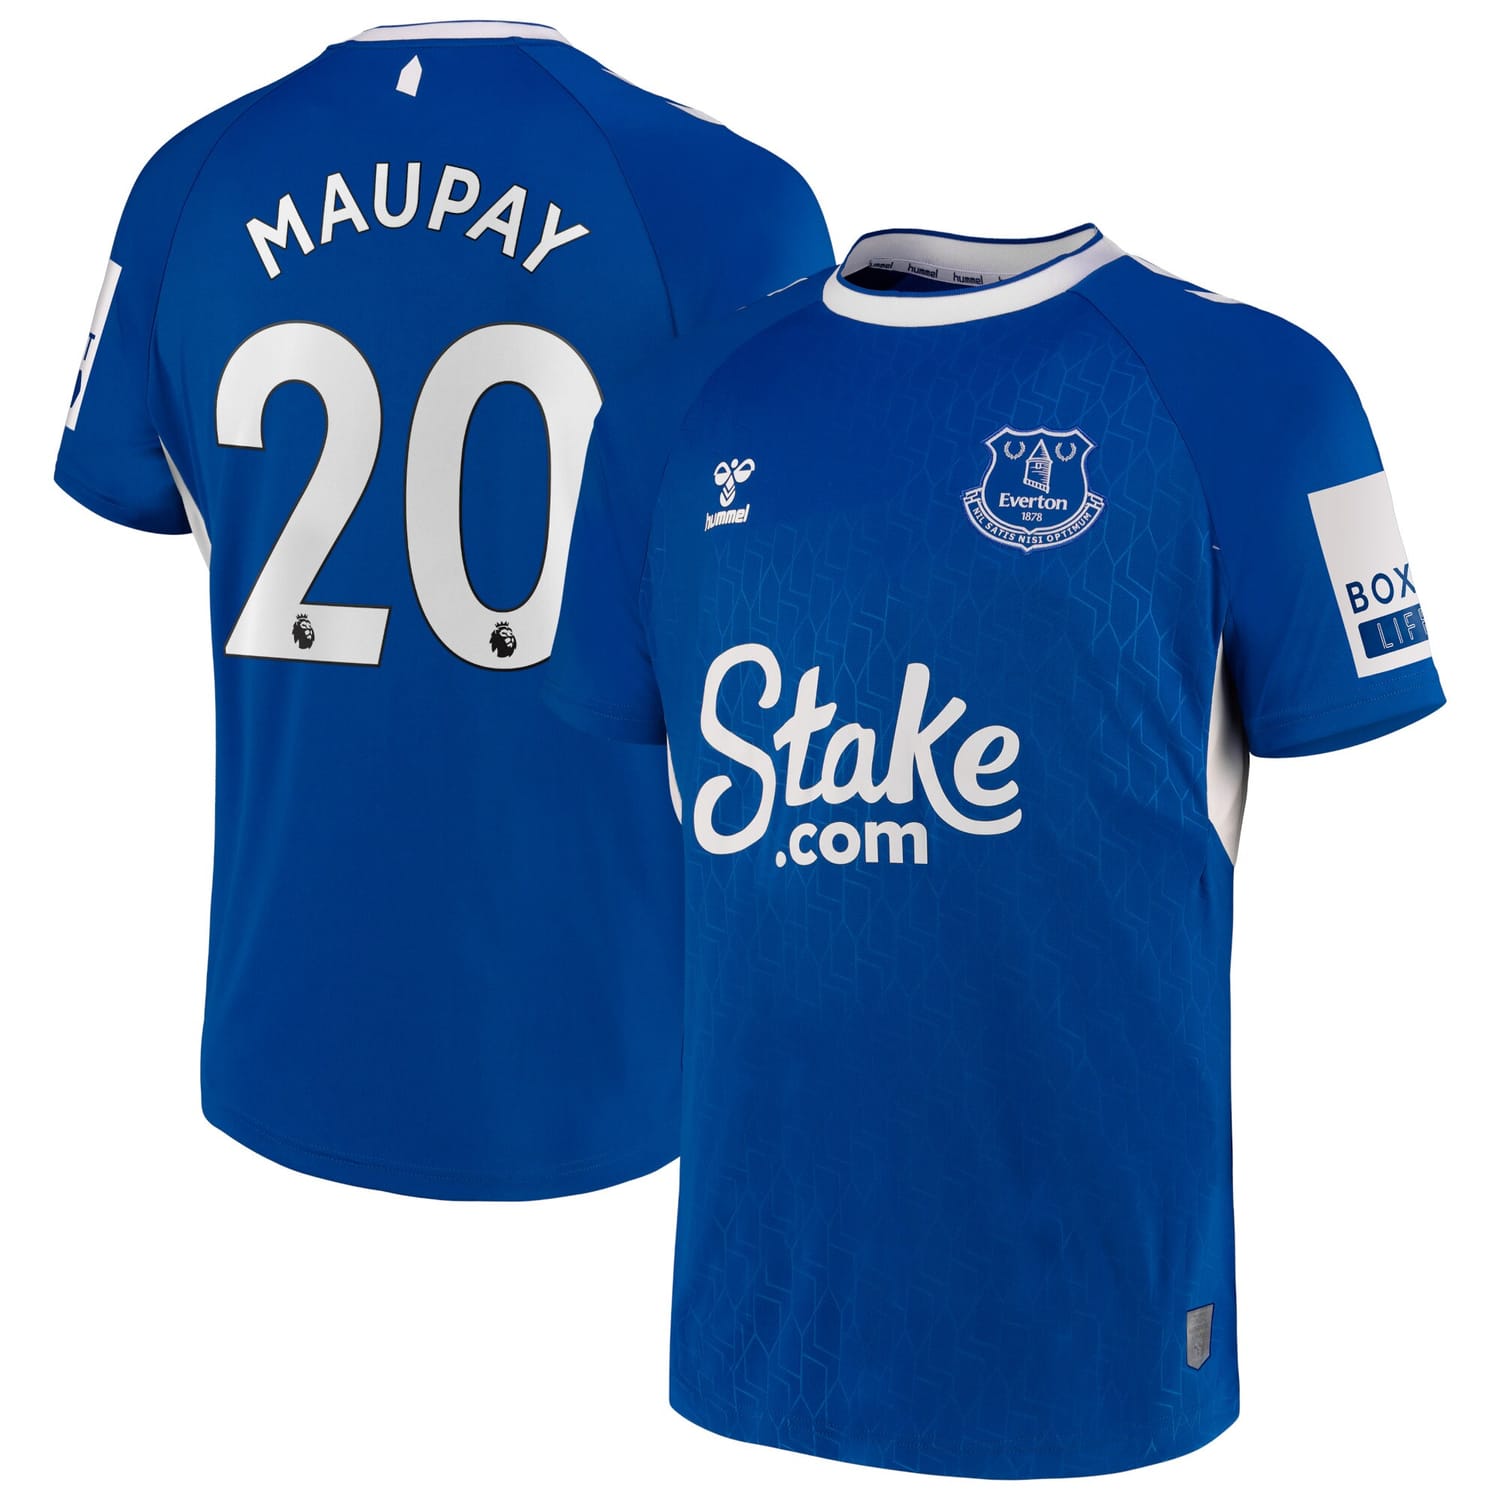 Premier League Everton Home Jersey Shirt 2022-23 player Neal Maupay 20 printing for Men